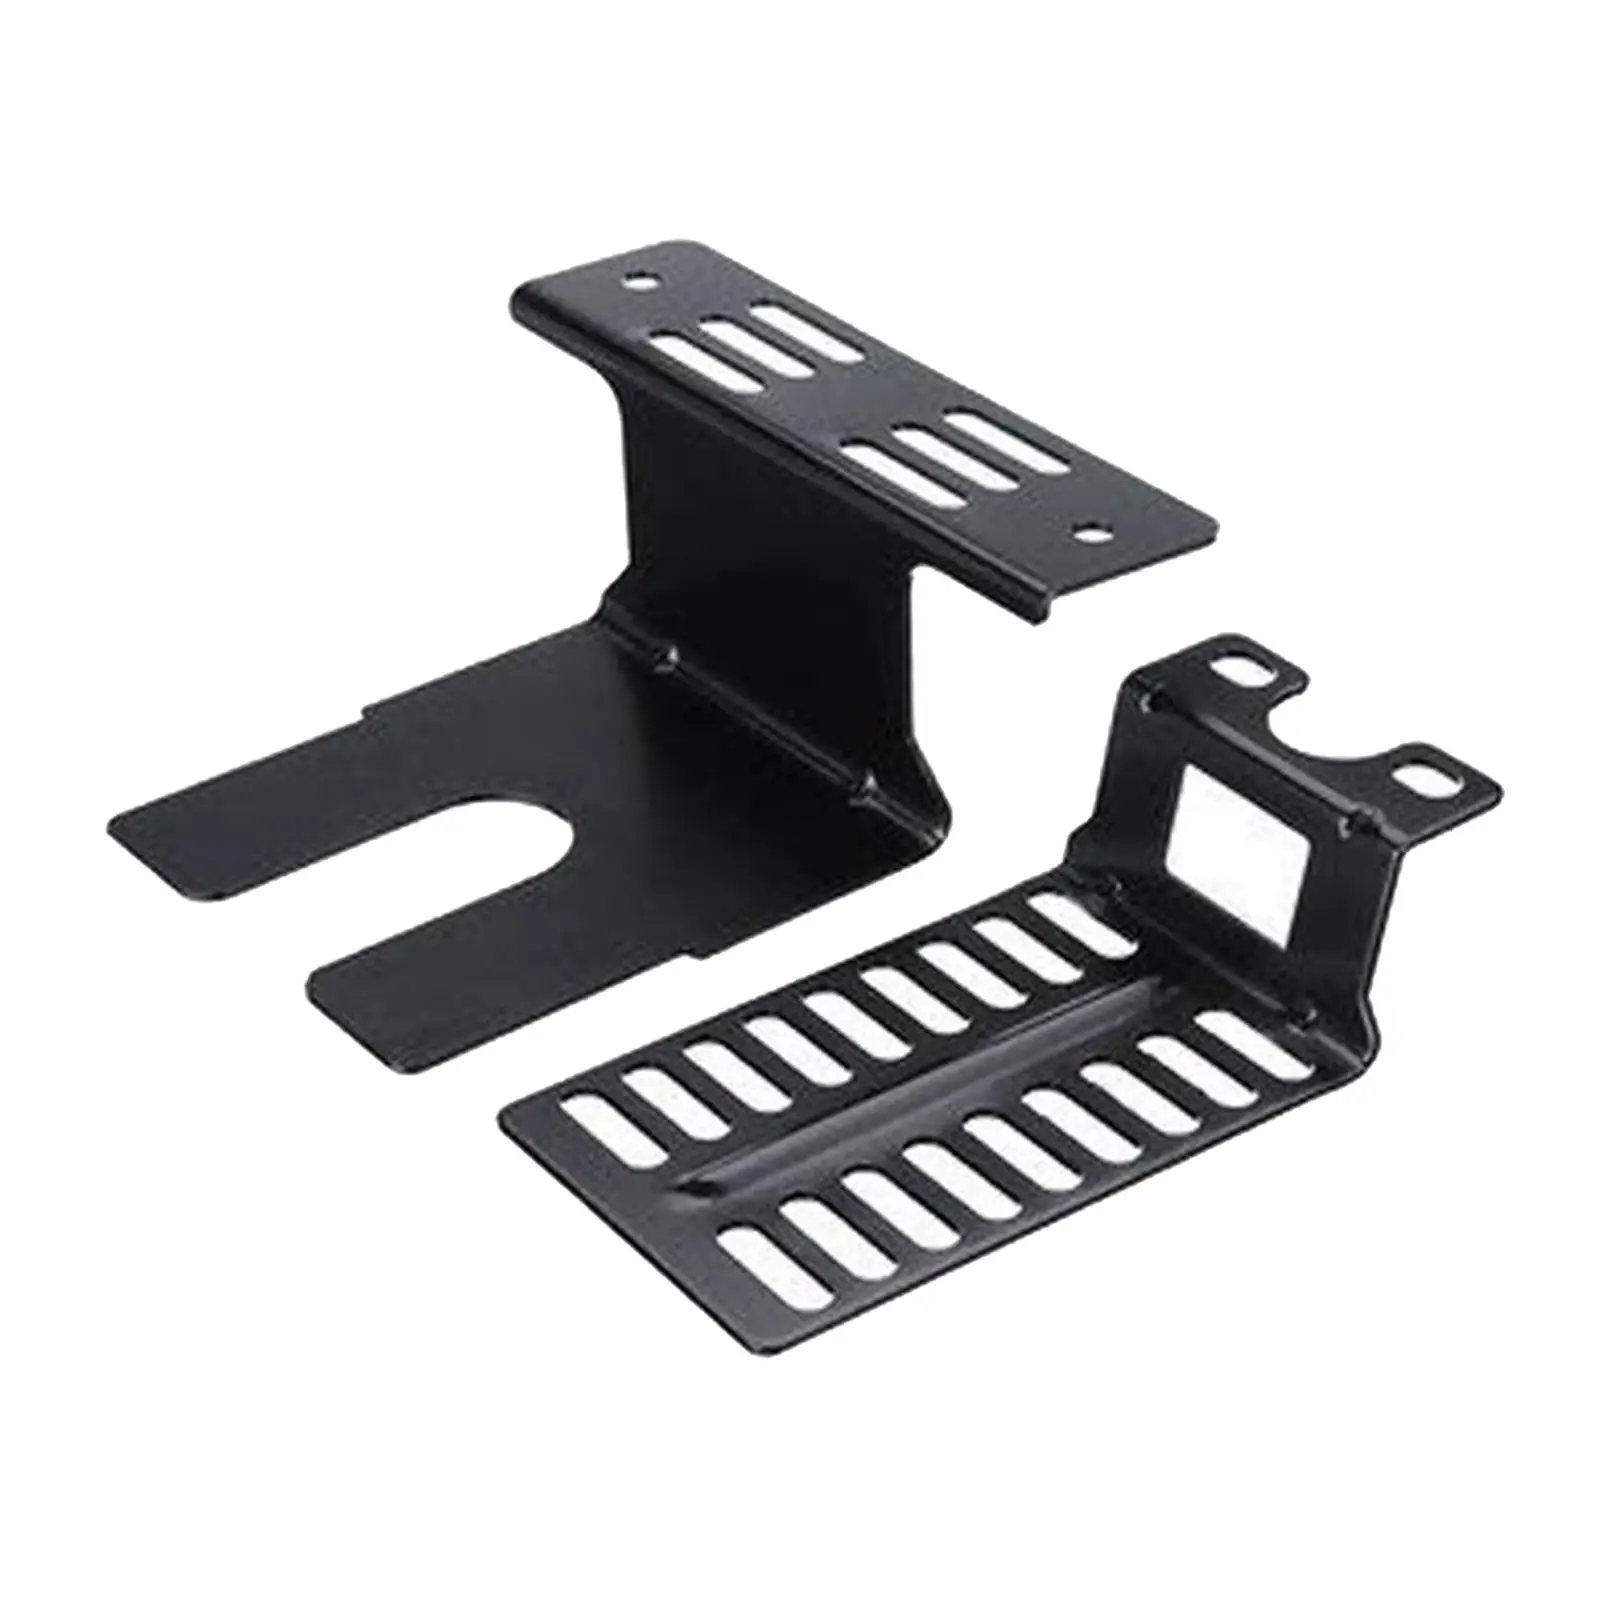 Grill Rotisserie Mounting Bracket Set Ordinary Easy to Install for Outdoor